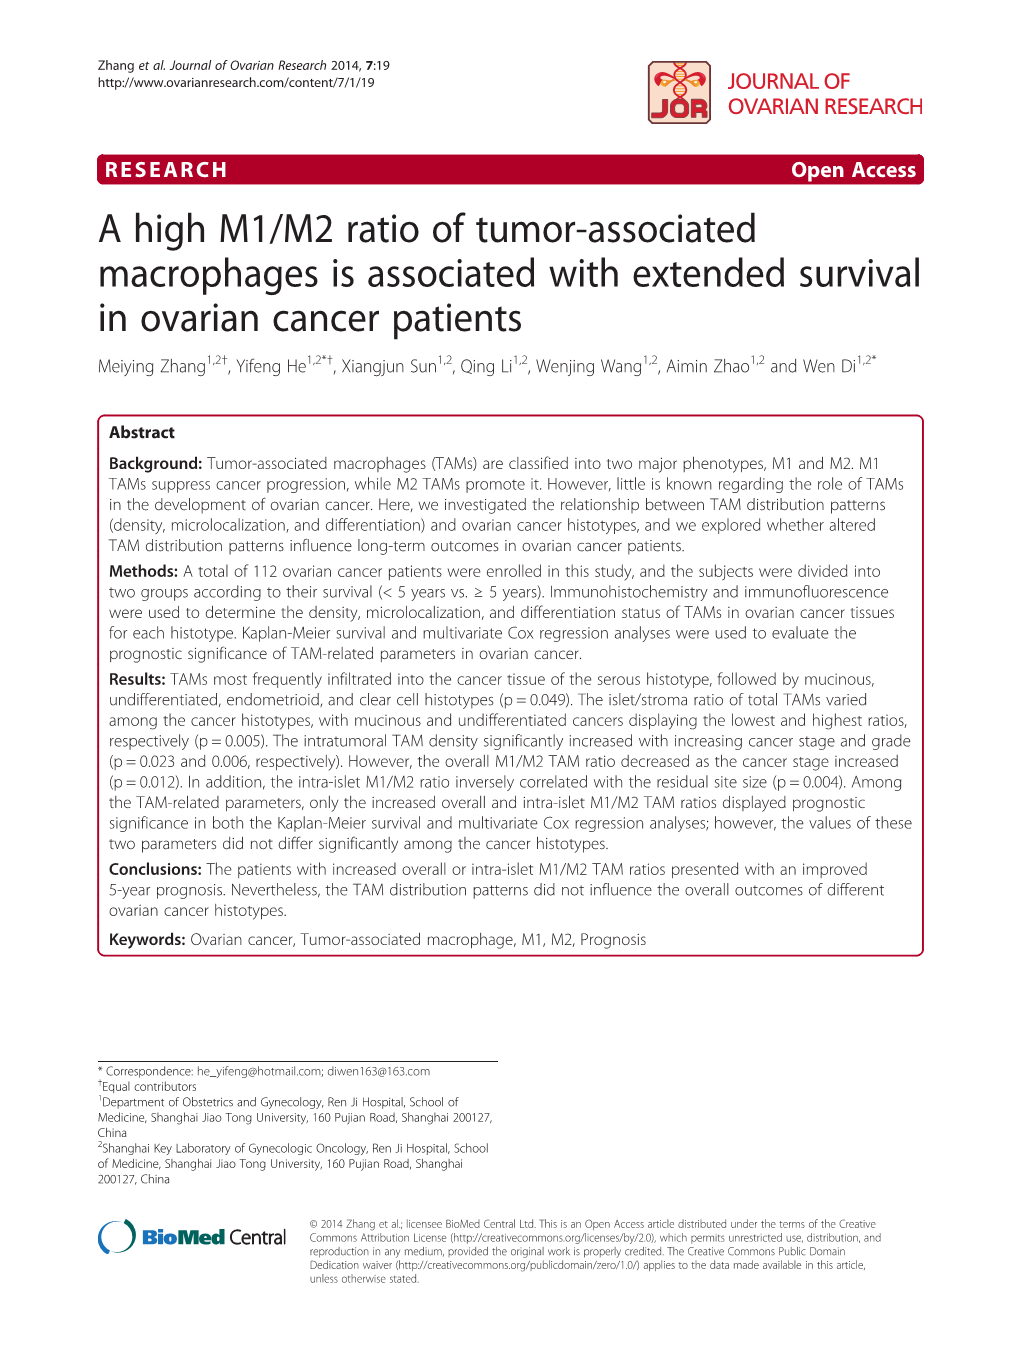 A High M1/M2 Ratio of Tumor-Associated Macrophages Is Associated with Extended Survival in Ovarian Cancer Patients